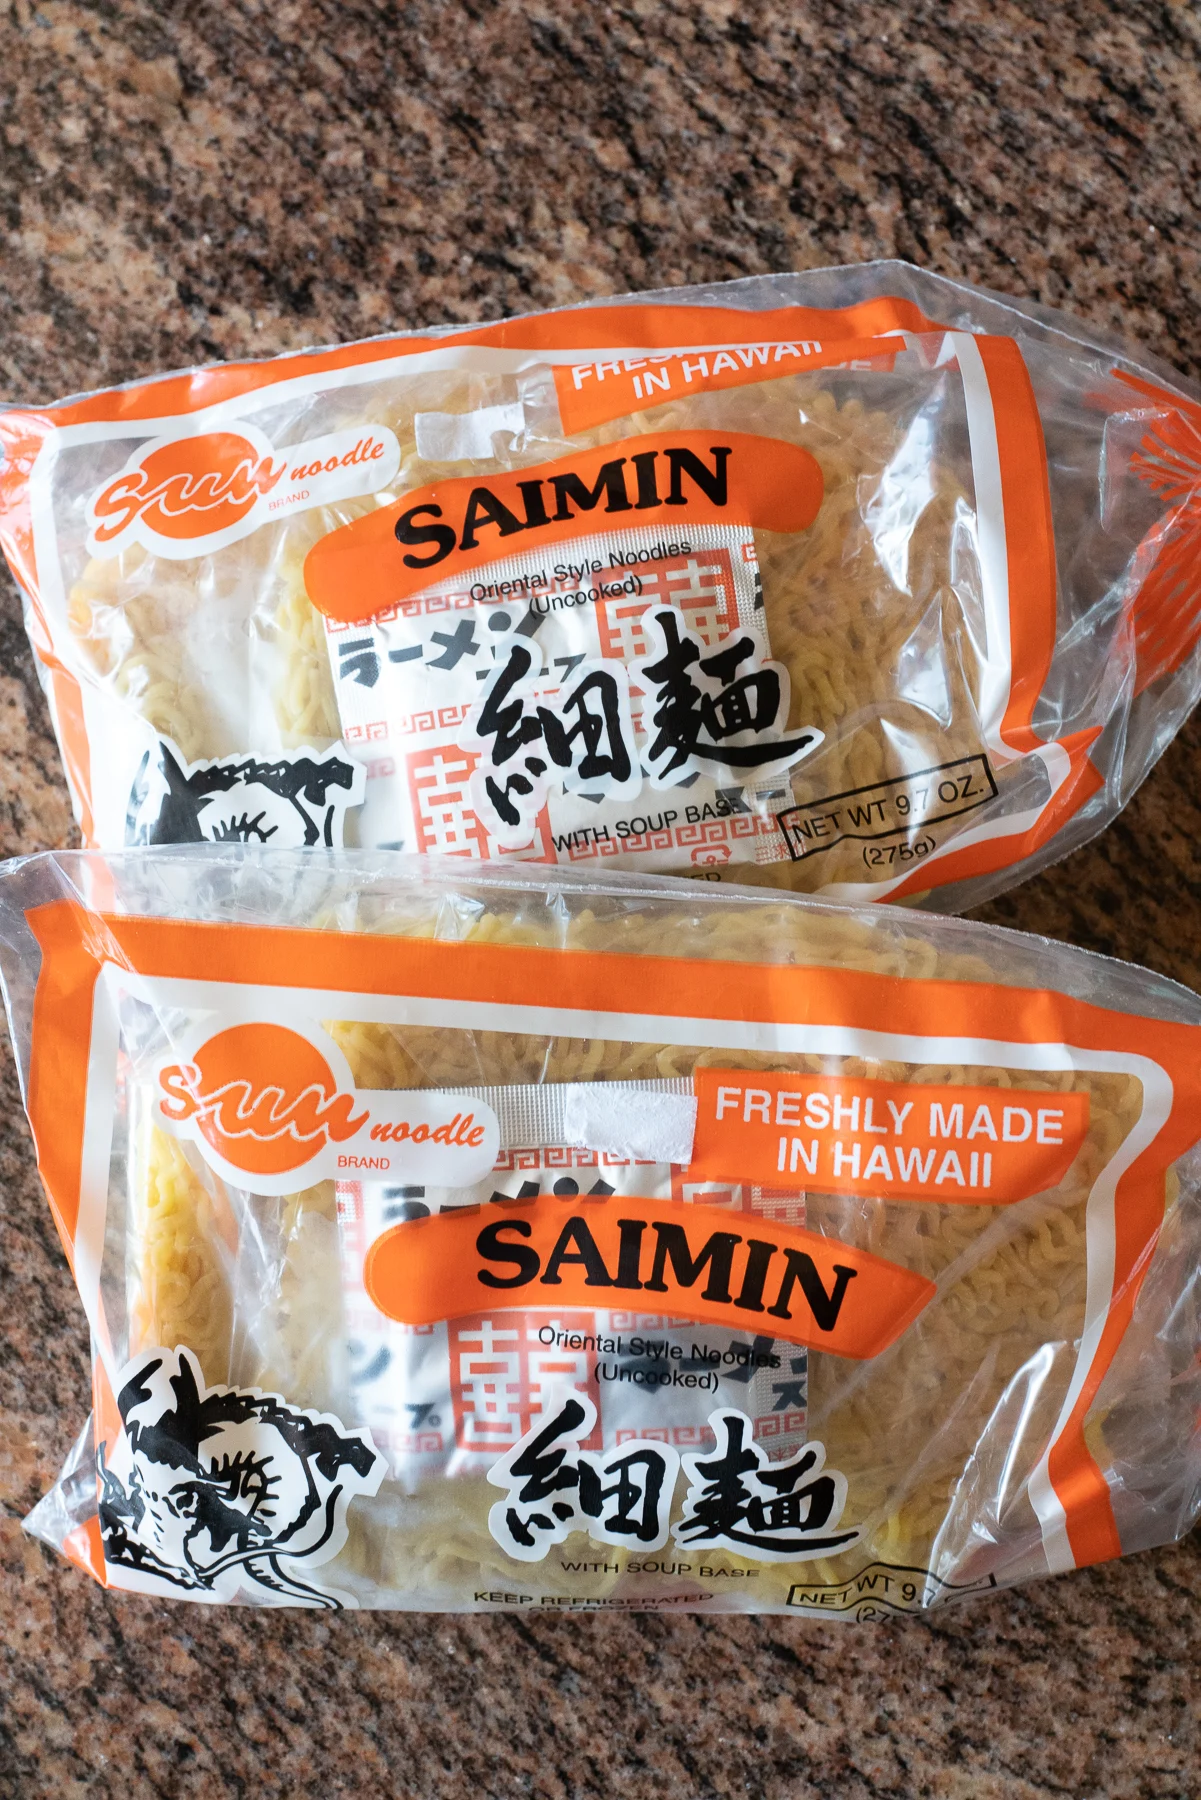 Packages of saimin noodles and seasoning powder from the supermarket.